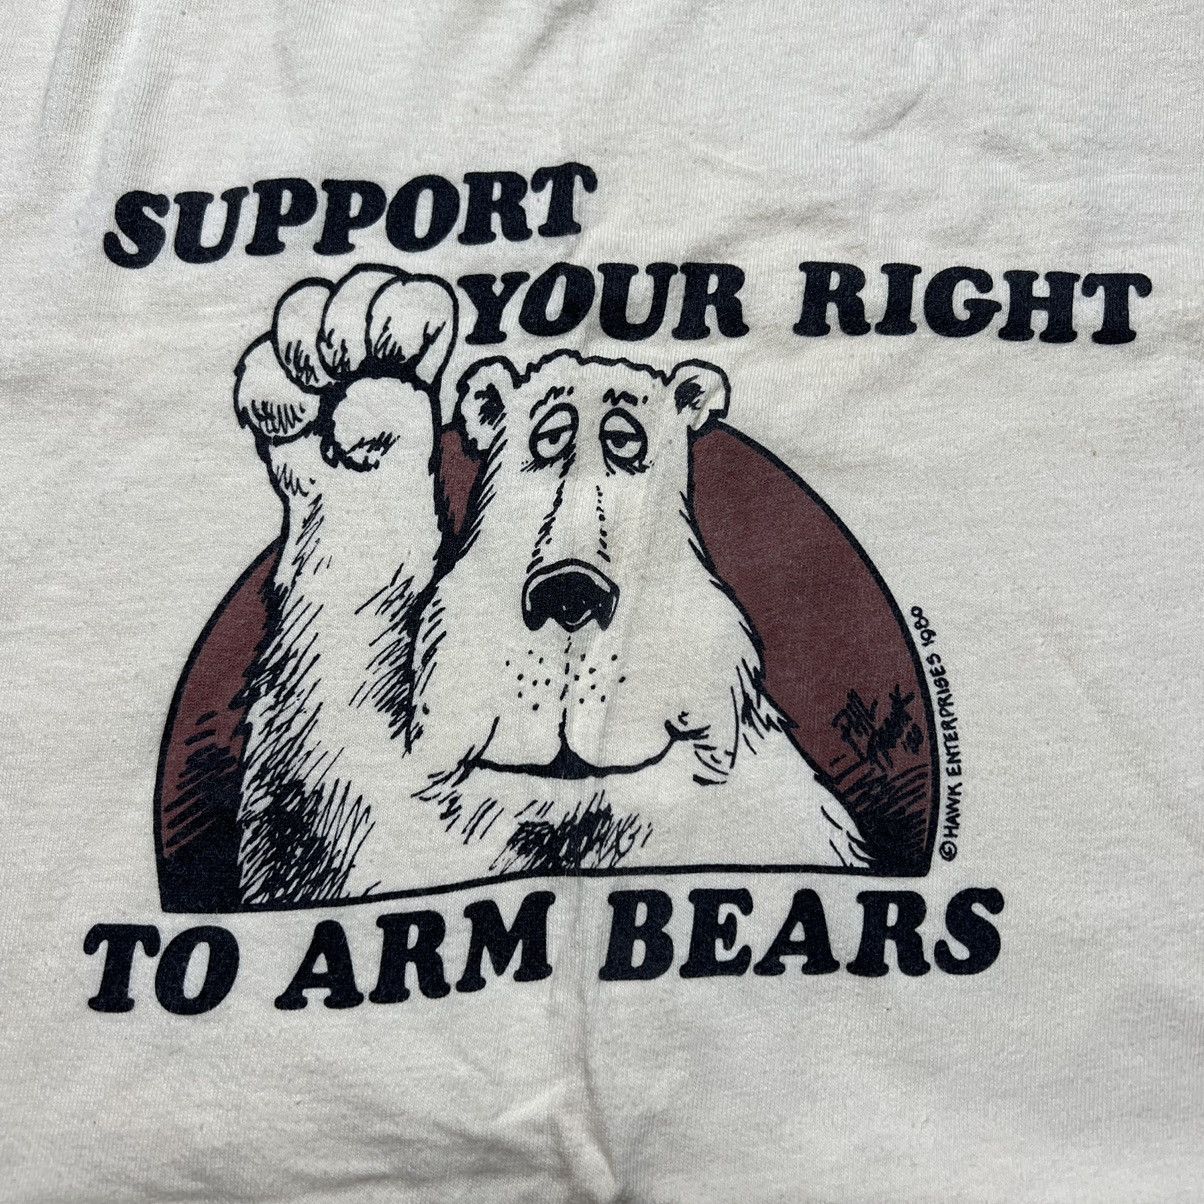 Vintage Vintage 1980’s Support Your Right To Arm Bears T-Shirt Size US XL / EU 56 / 4 - 2 Preview